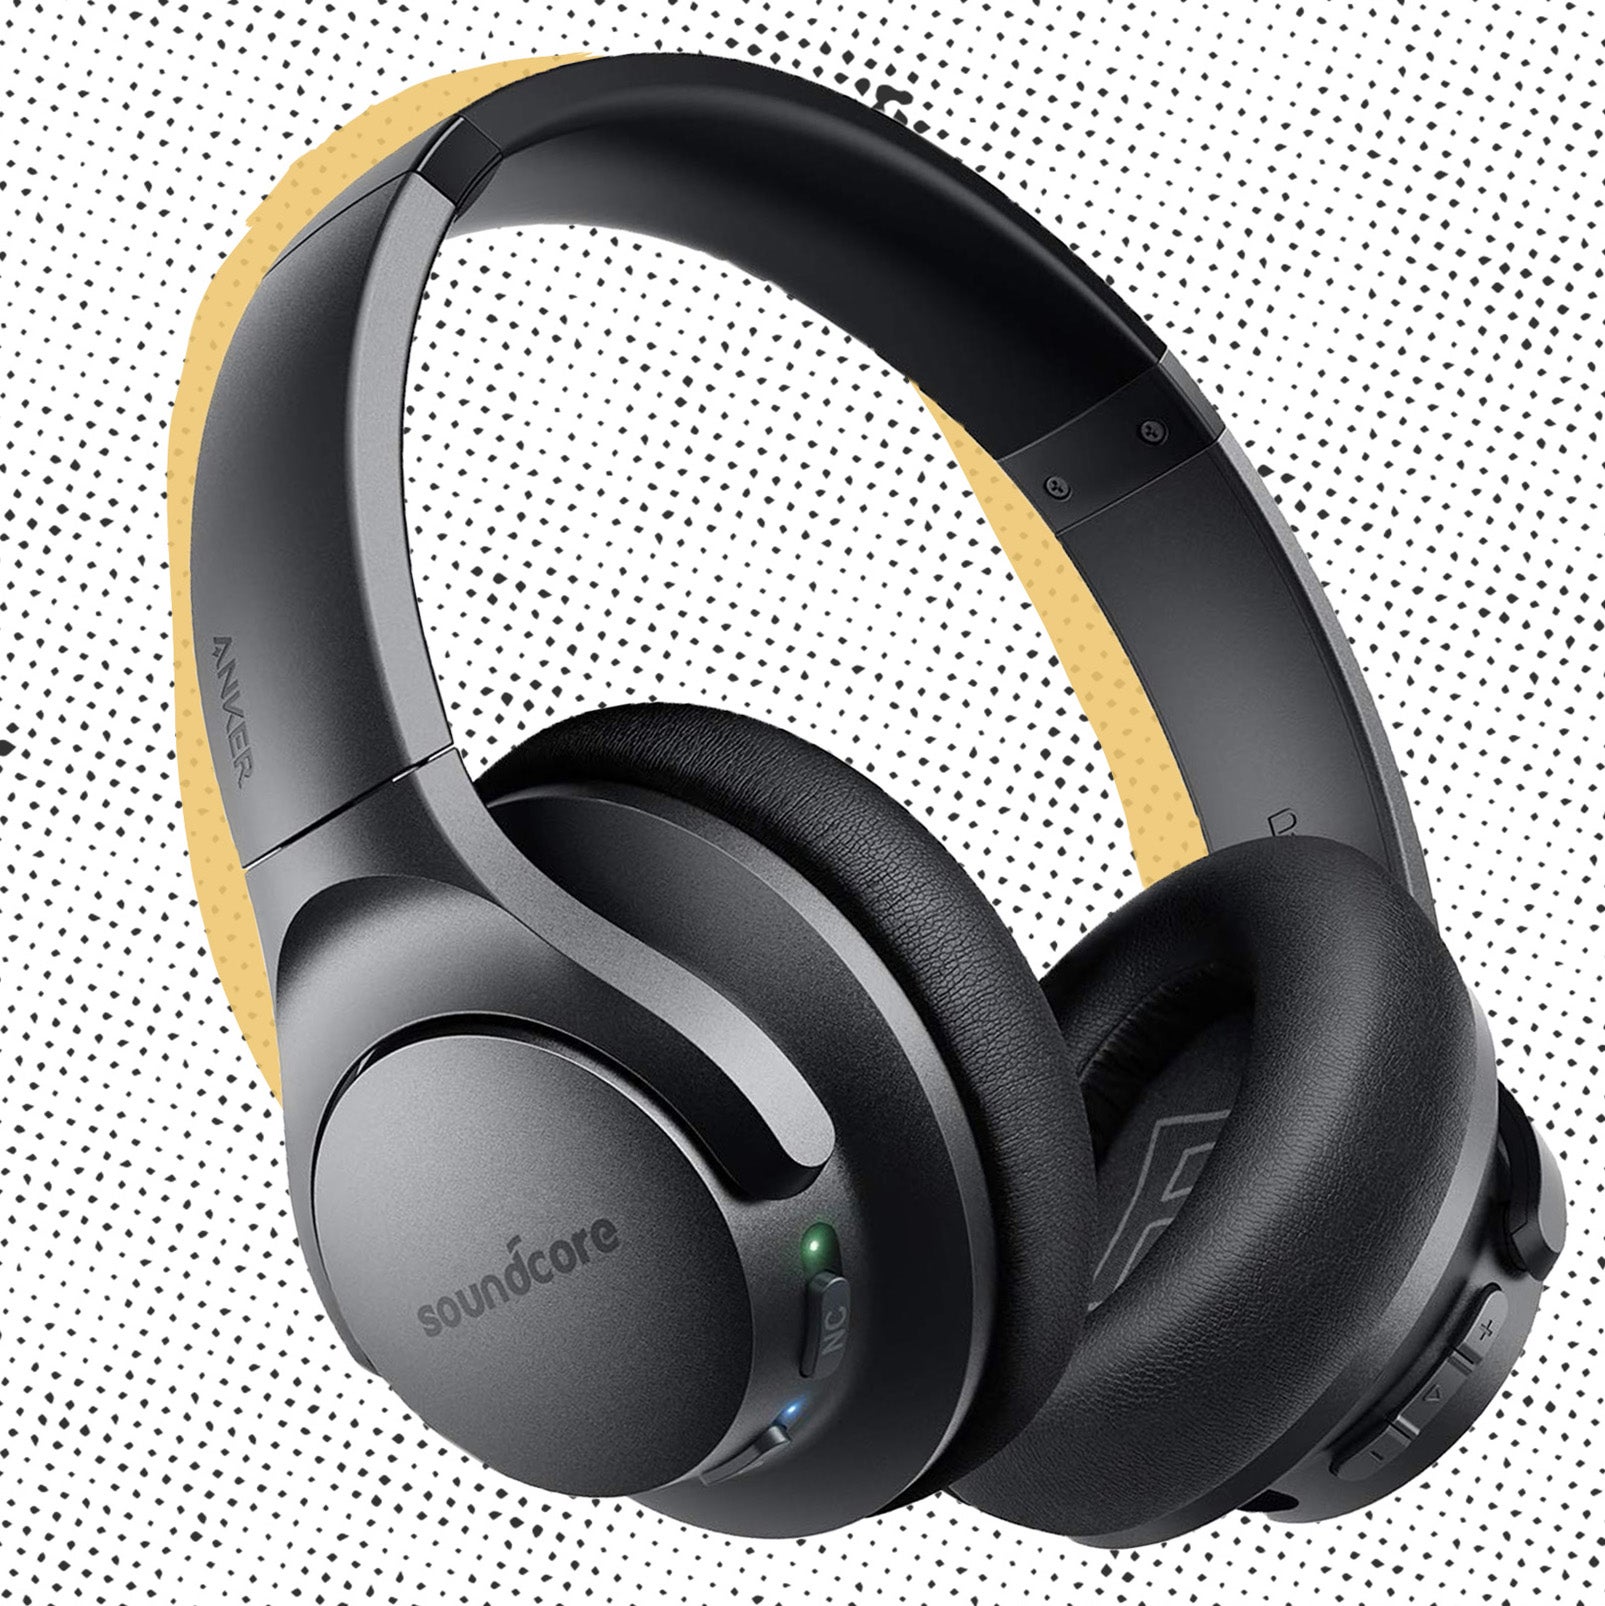 These Soundcore noise-cancelling headphones are on offer